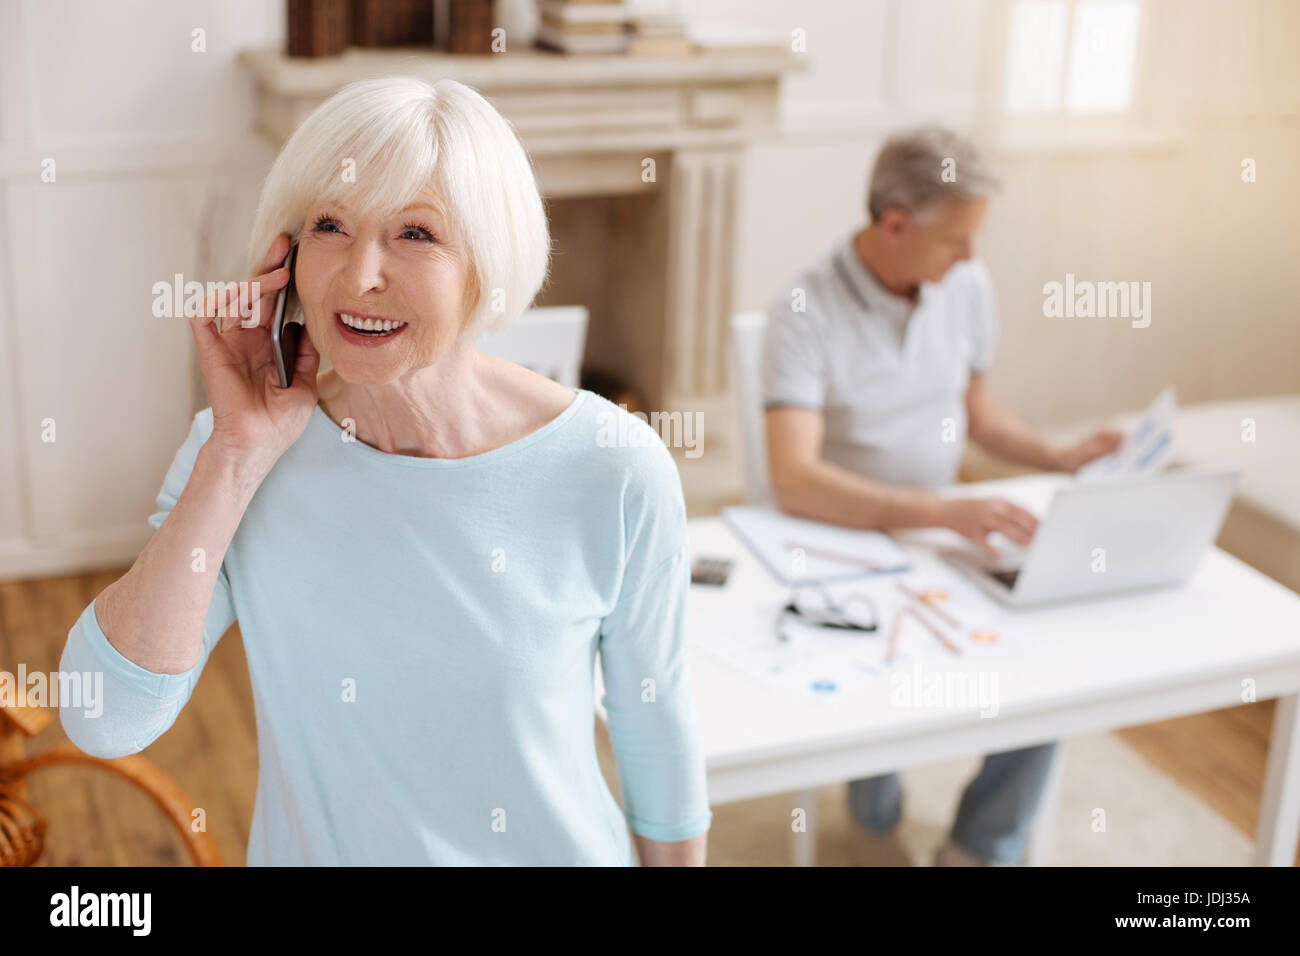 Charismatic ambitious lady making a phone call Stock Photo